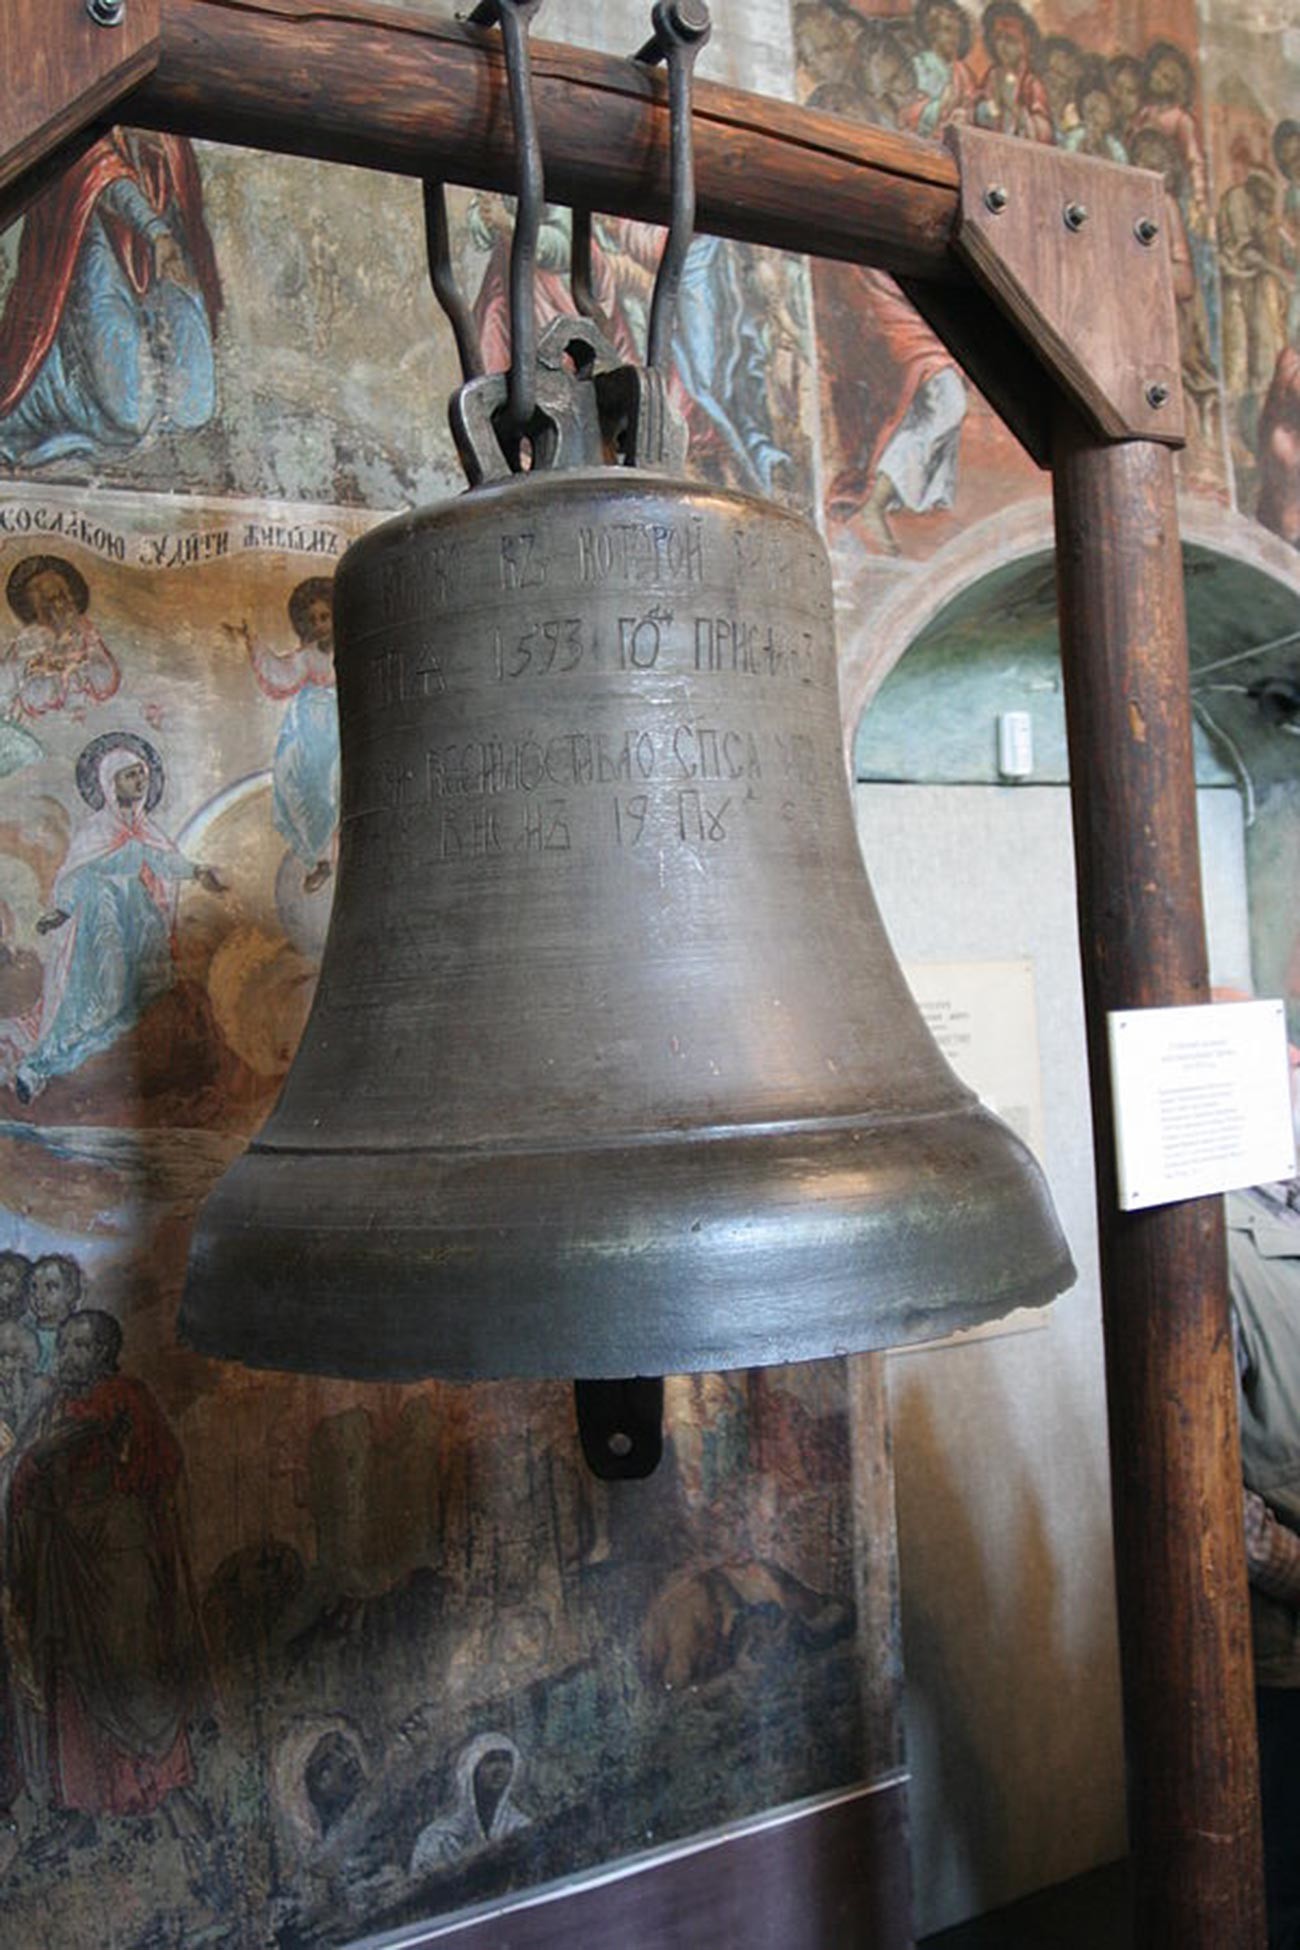 The tocsin bell that summoned the people of Uglich after Dmitry's death and was later exiled to Siberia.